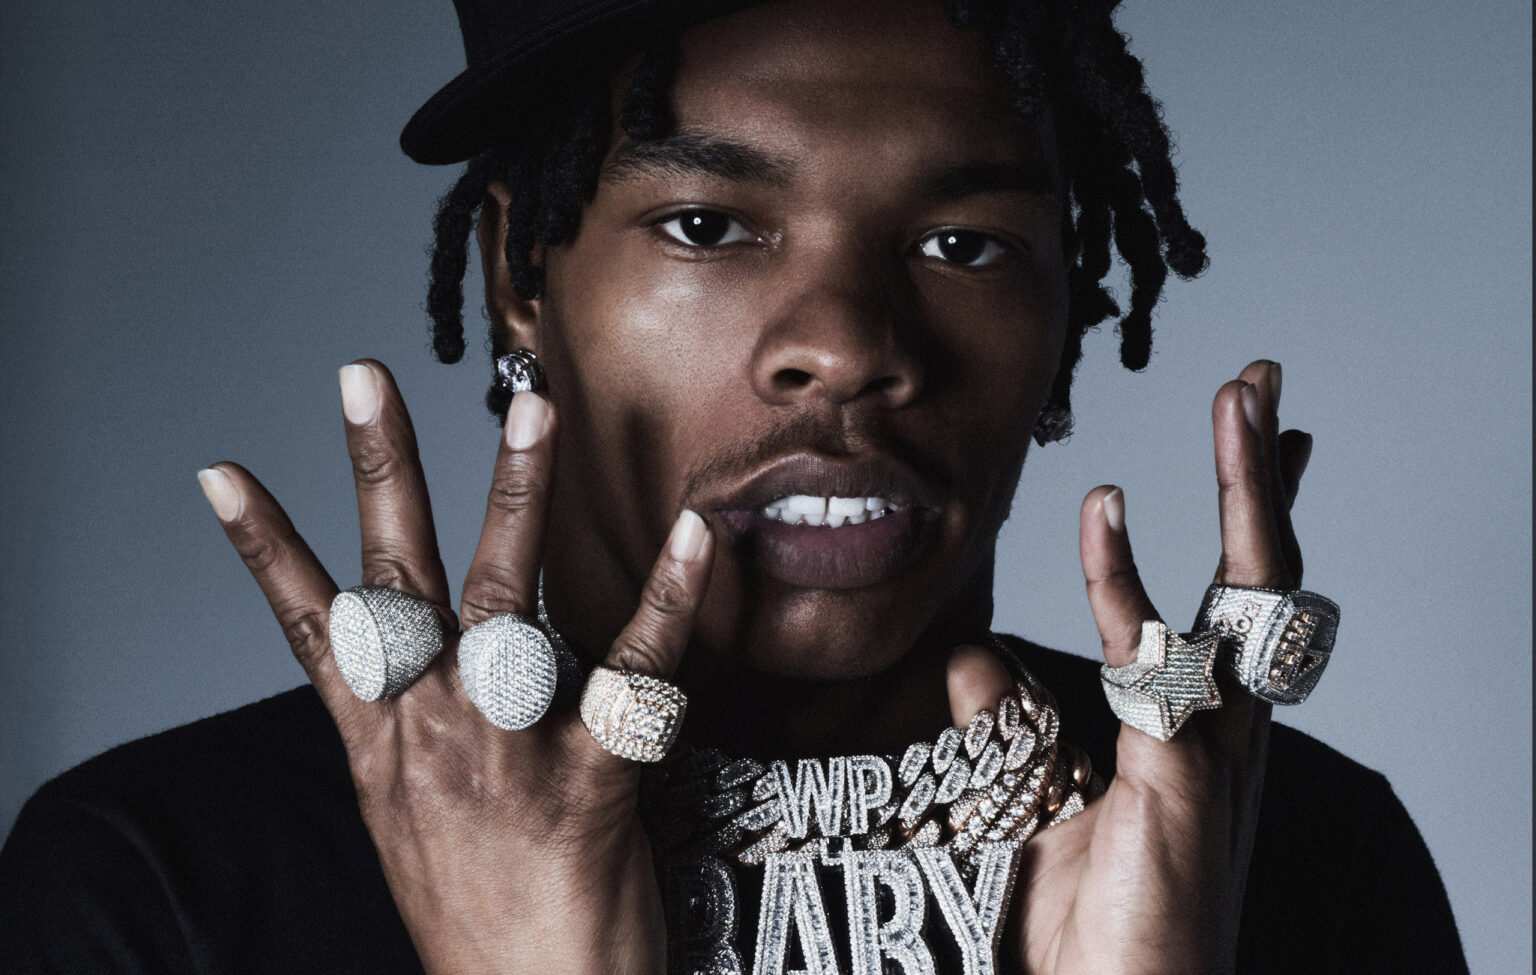 Lil Baby is one of the biggest rap stars in the world. Discover the rapper's net worth and his various business dealings.